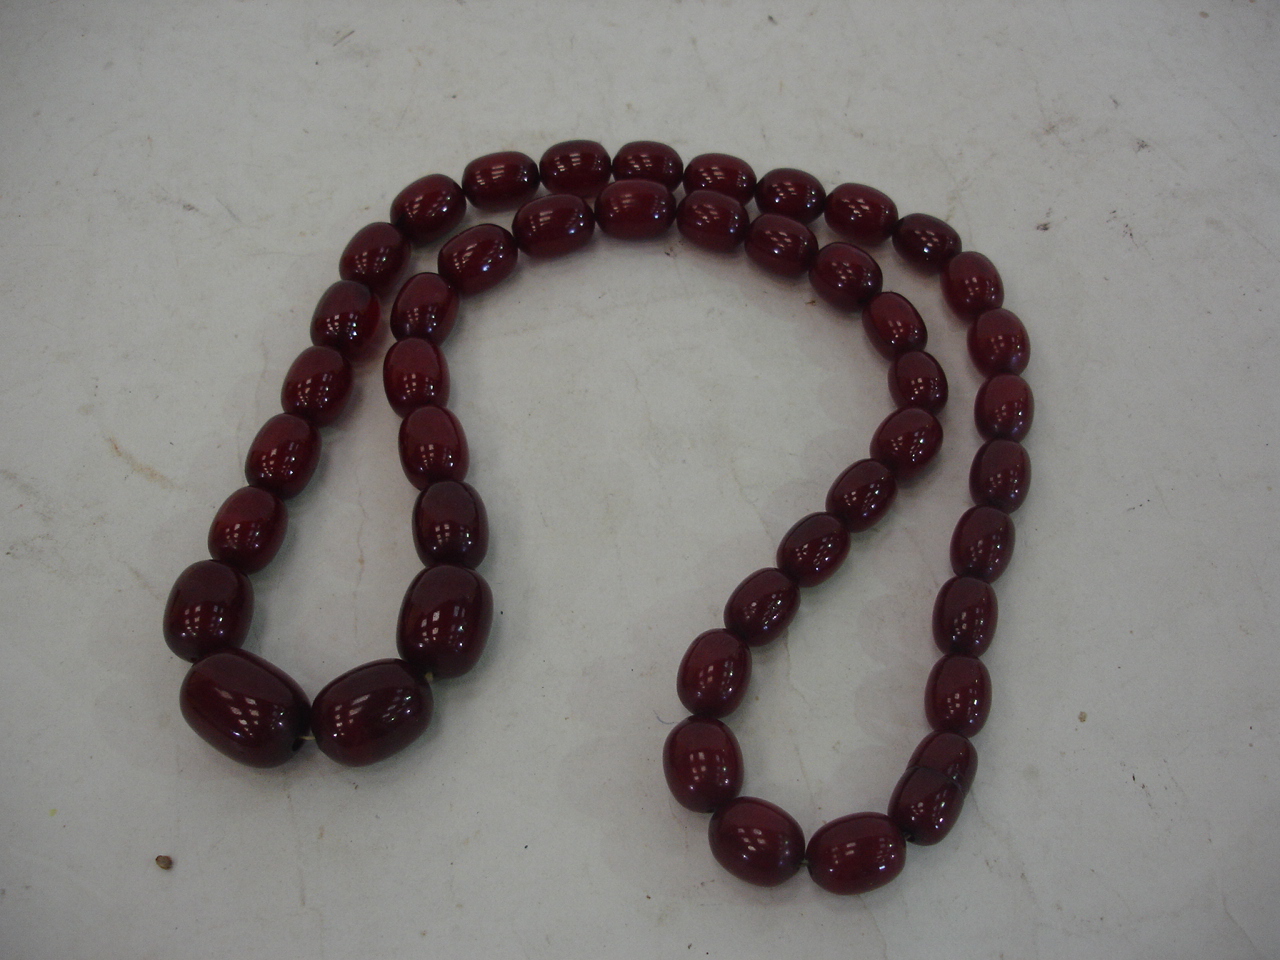 A cherry amber bead necklace 30" long